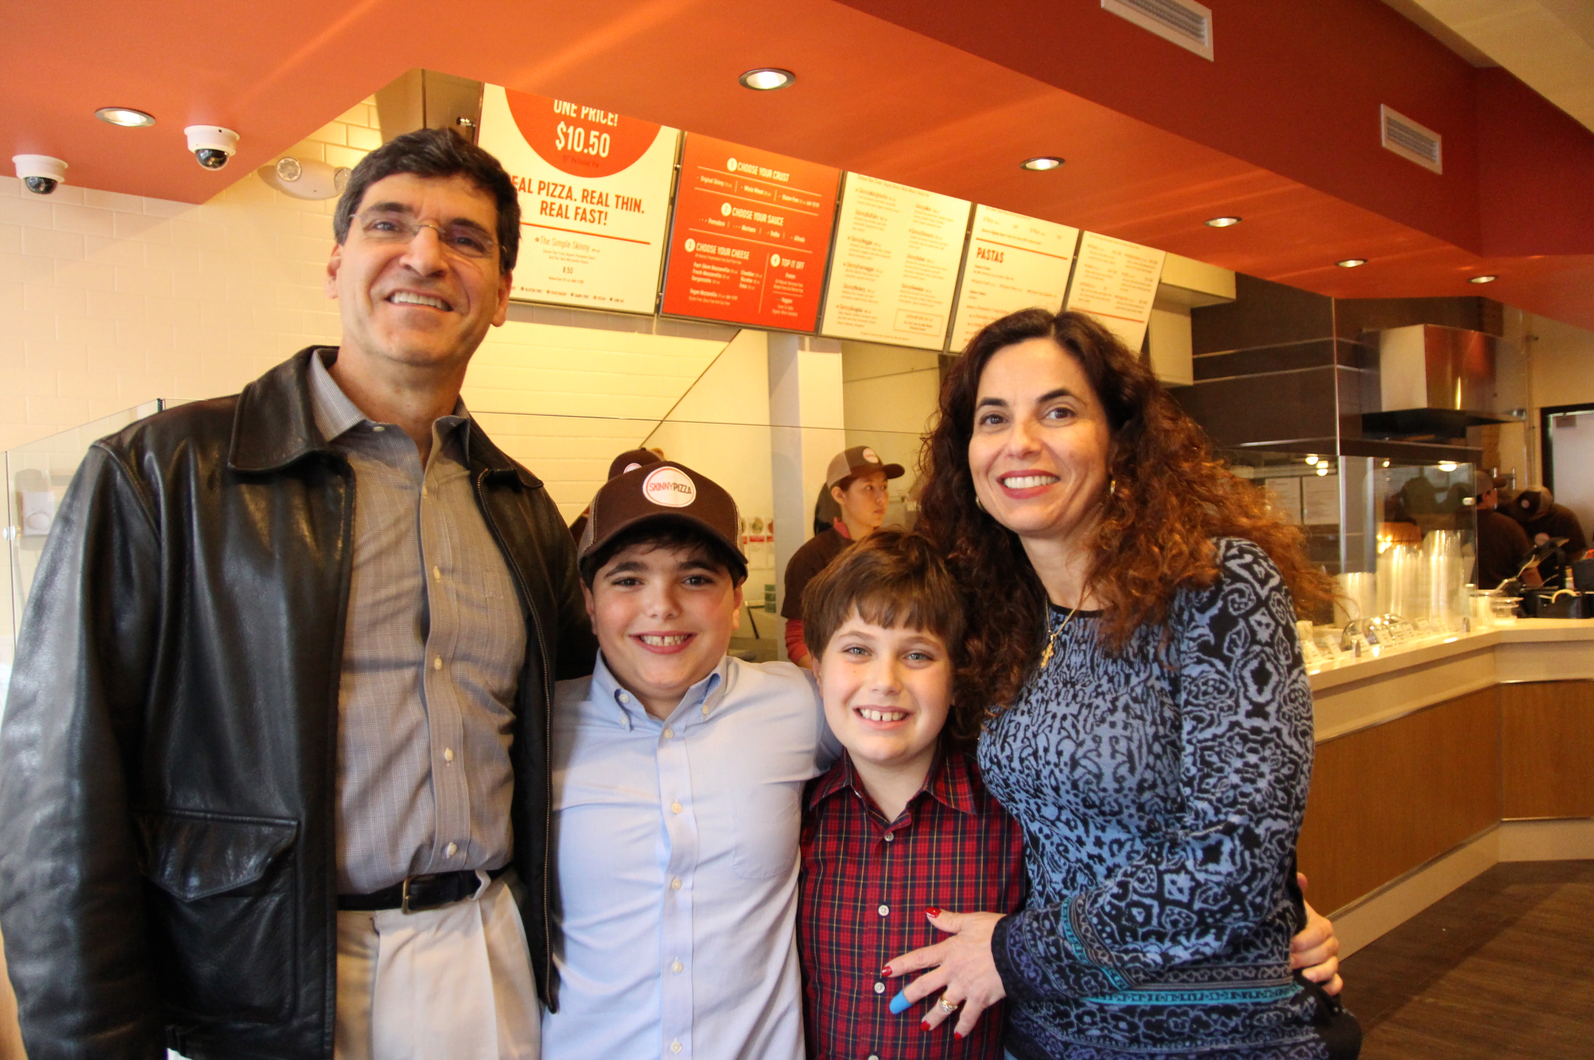 The Bouboulis family – Denis, Anthony, Alexander and Eleni in their new Skinny Pizza restaurant. April 4, 2018 Photo: Leslie Yager